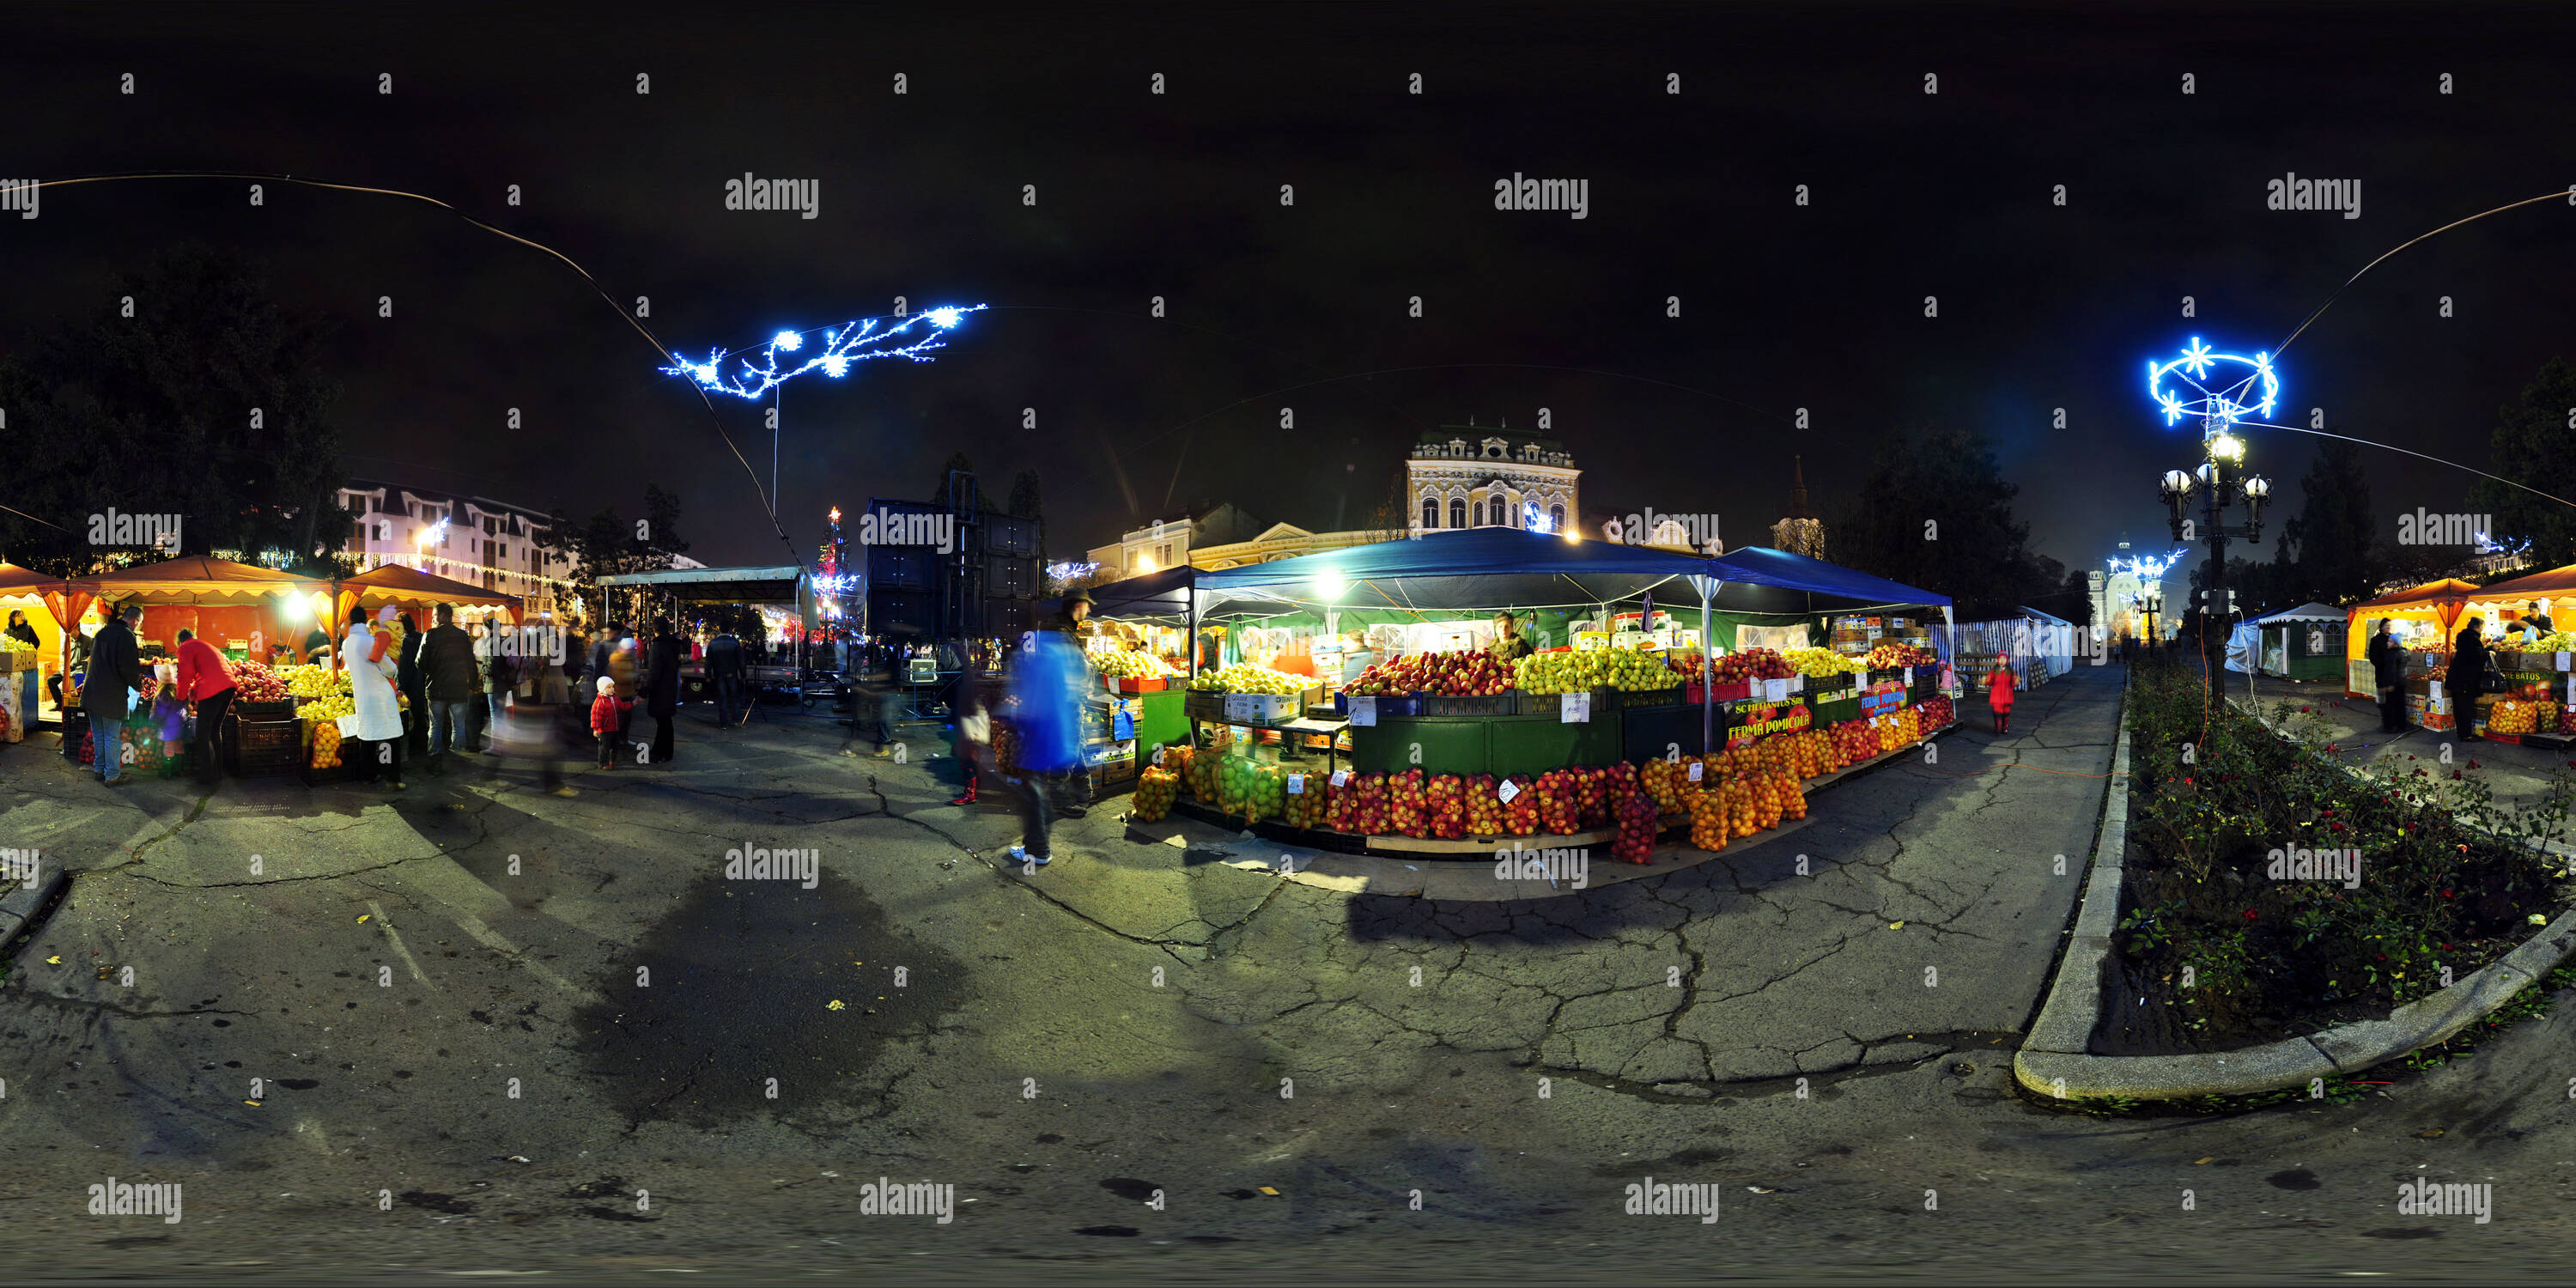 360 degree panoramic view of Apple Market in the Roses Square in Targu Mures